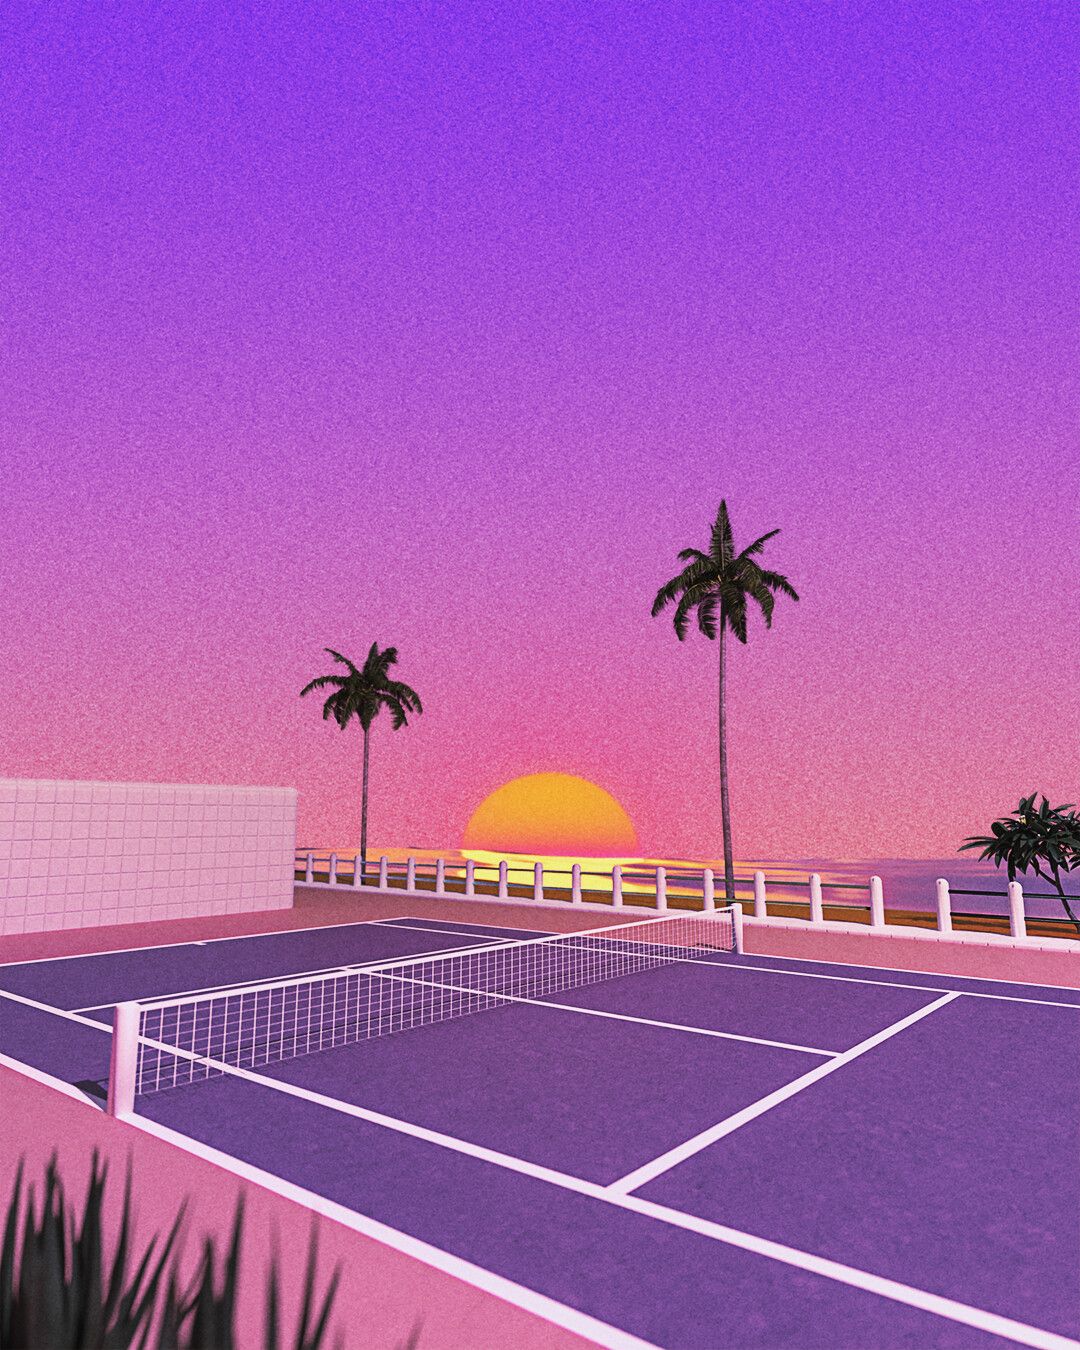 An illustration of a tennis court with a sunset in the background - Tennis